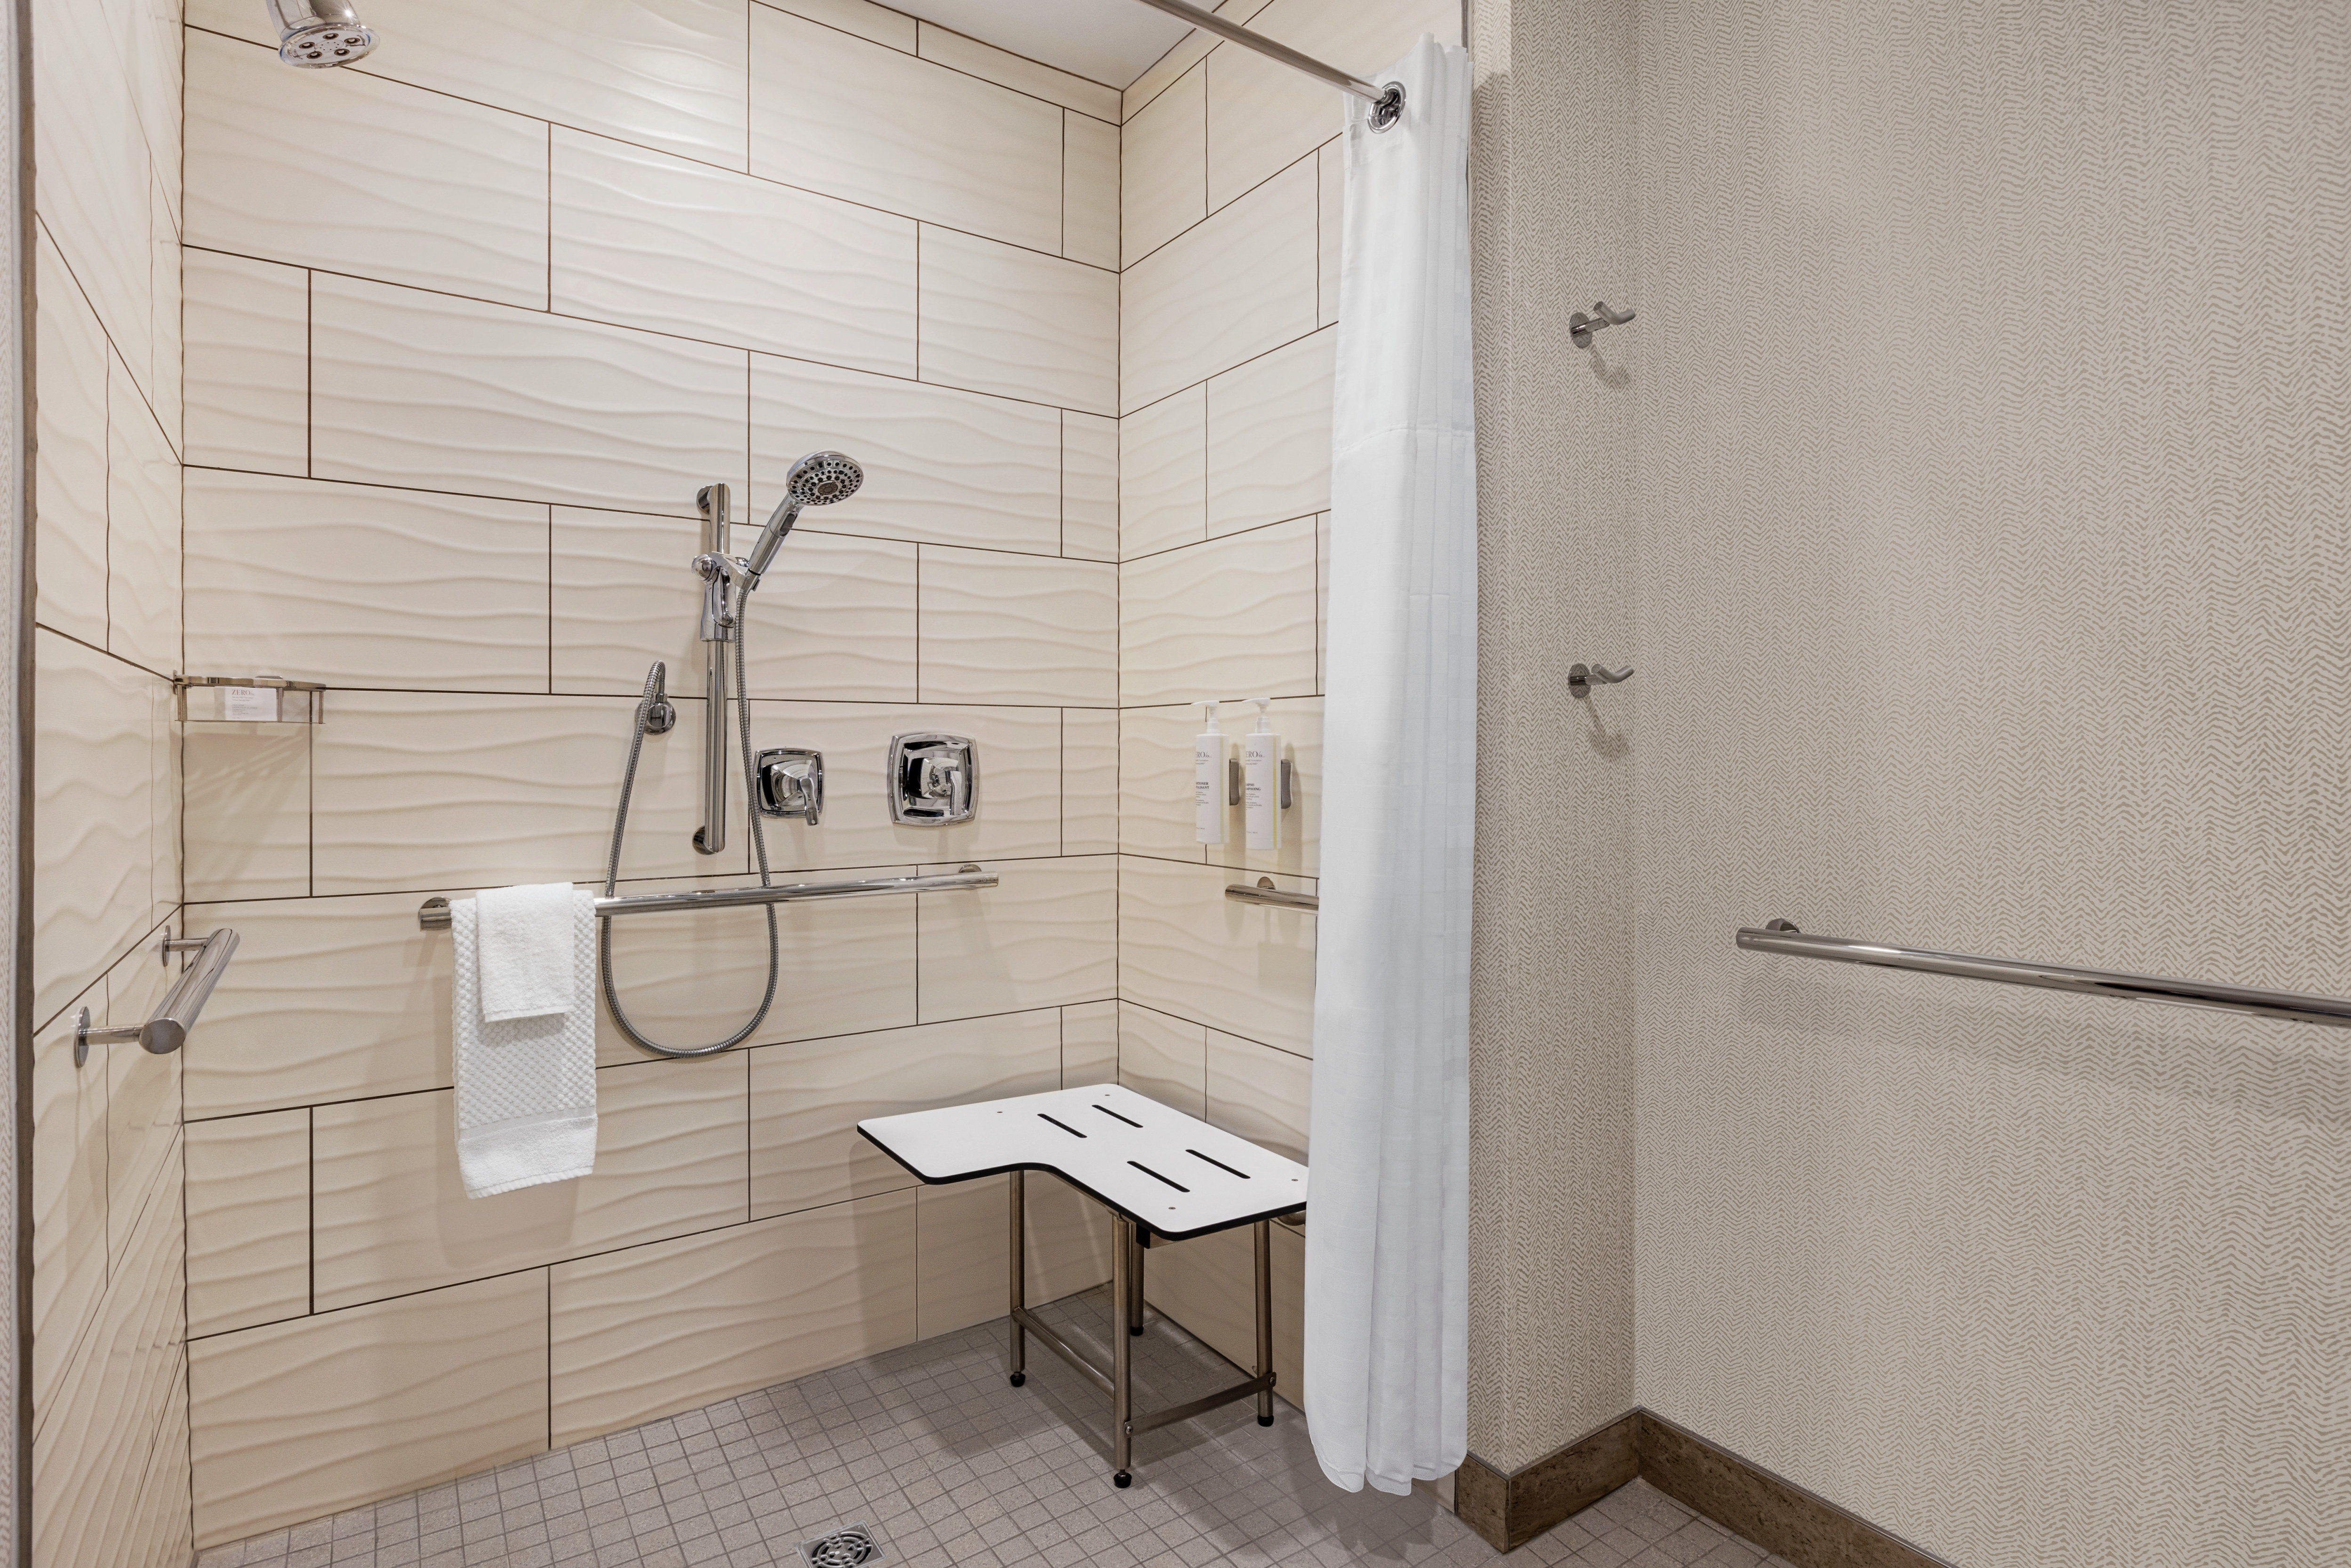 Spacious accessible bathroom featuring convenient roll-in shower with seat and grab bars for safety.